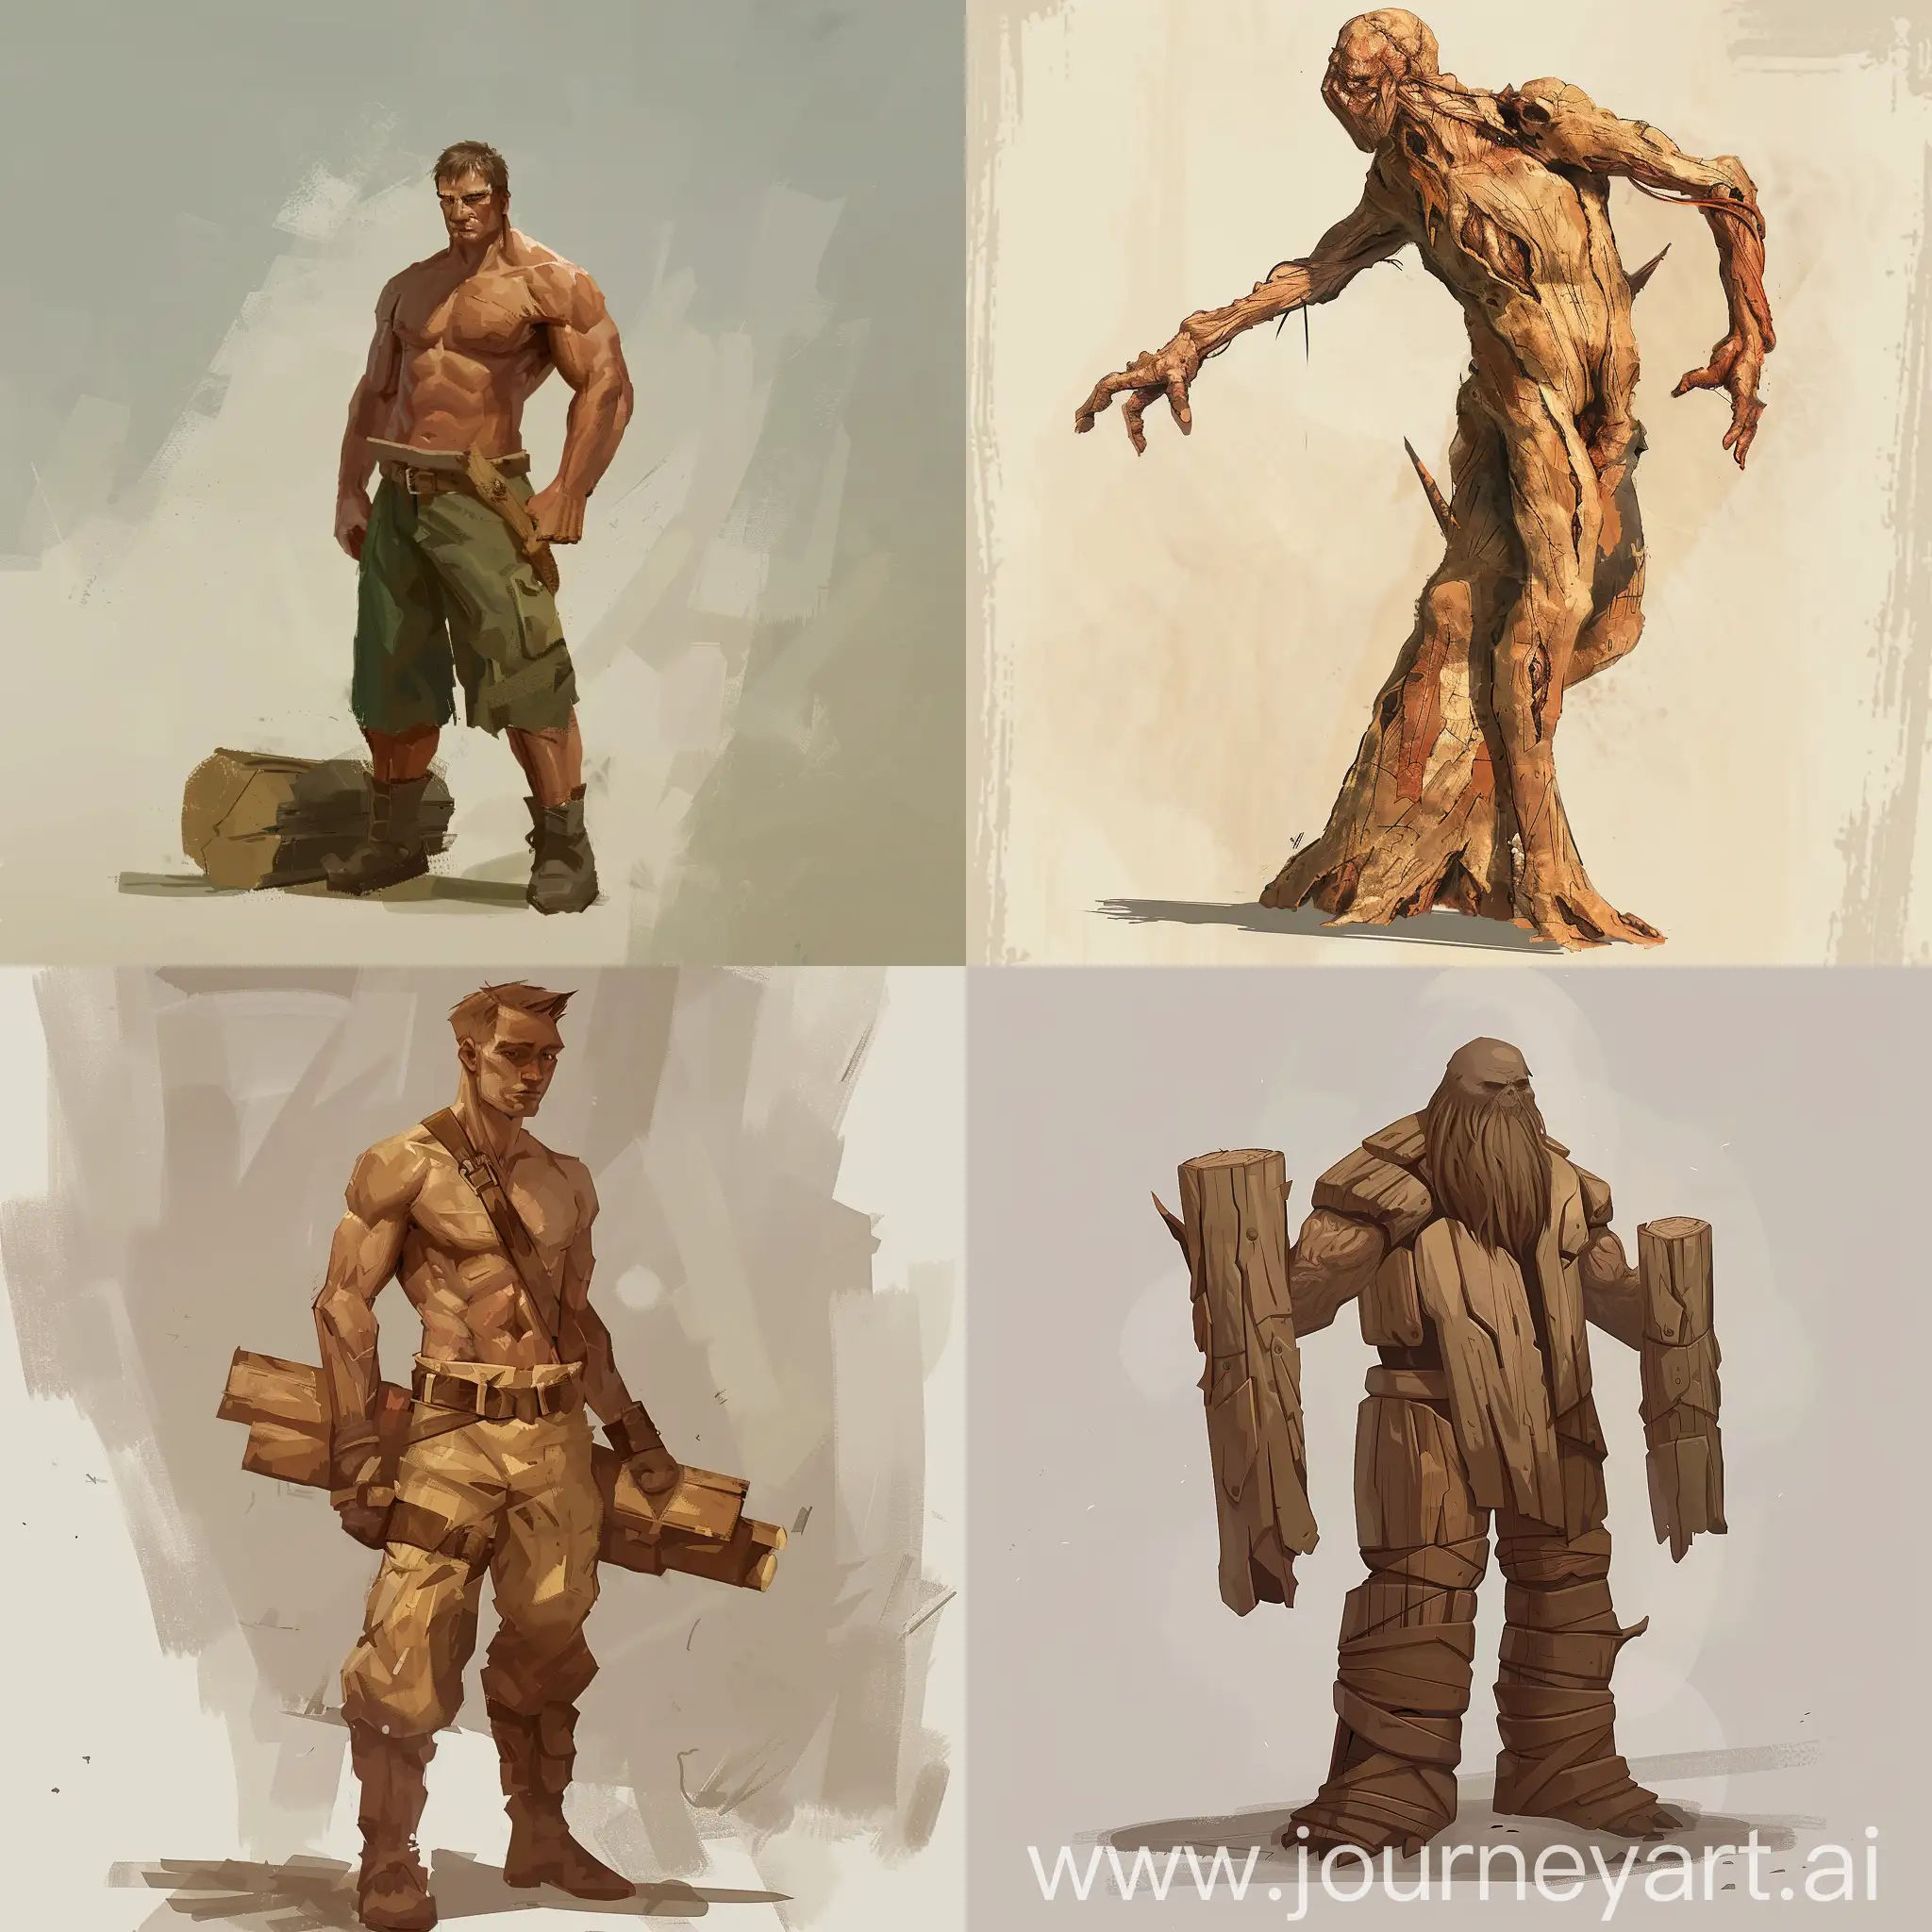 woodcutter, full body, character design, standing in A-Pose, arms away from body.